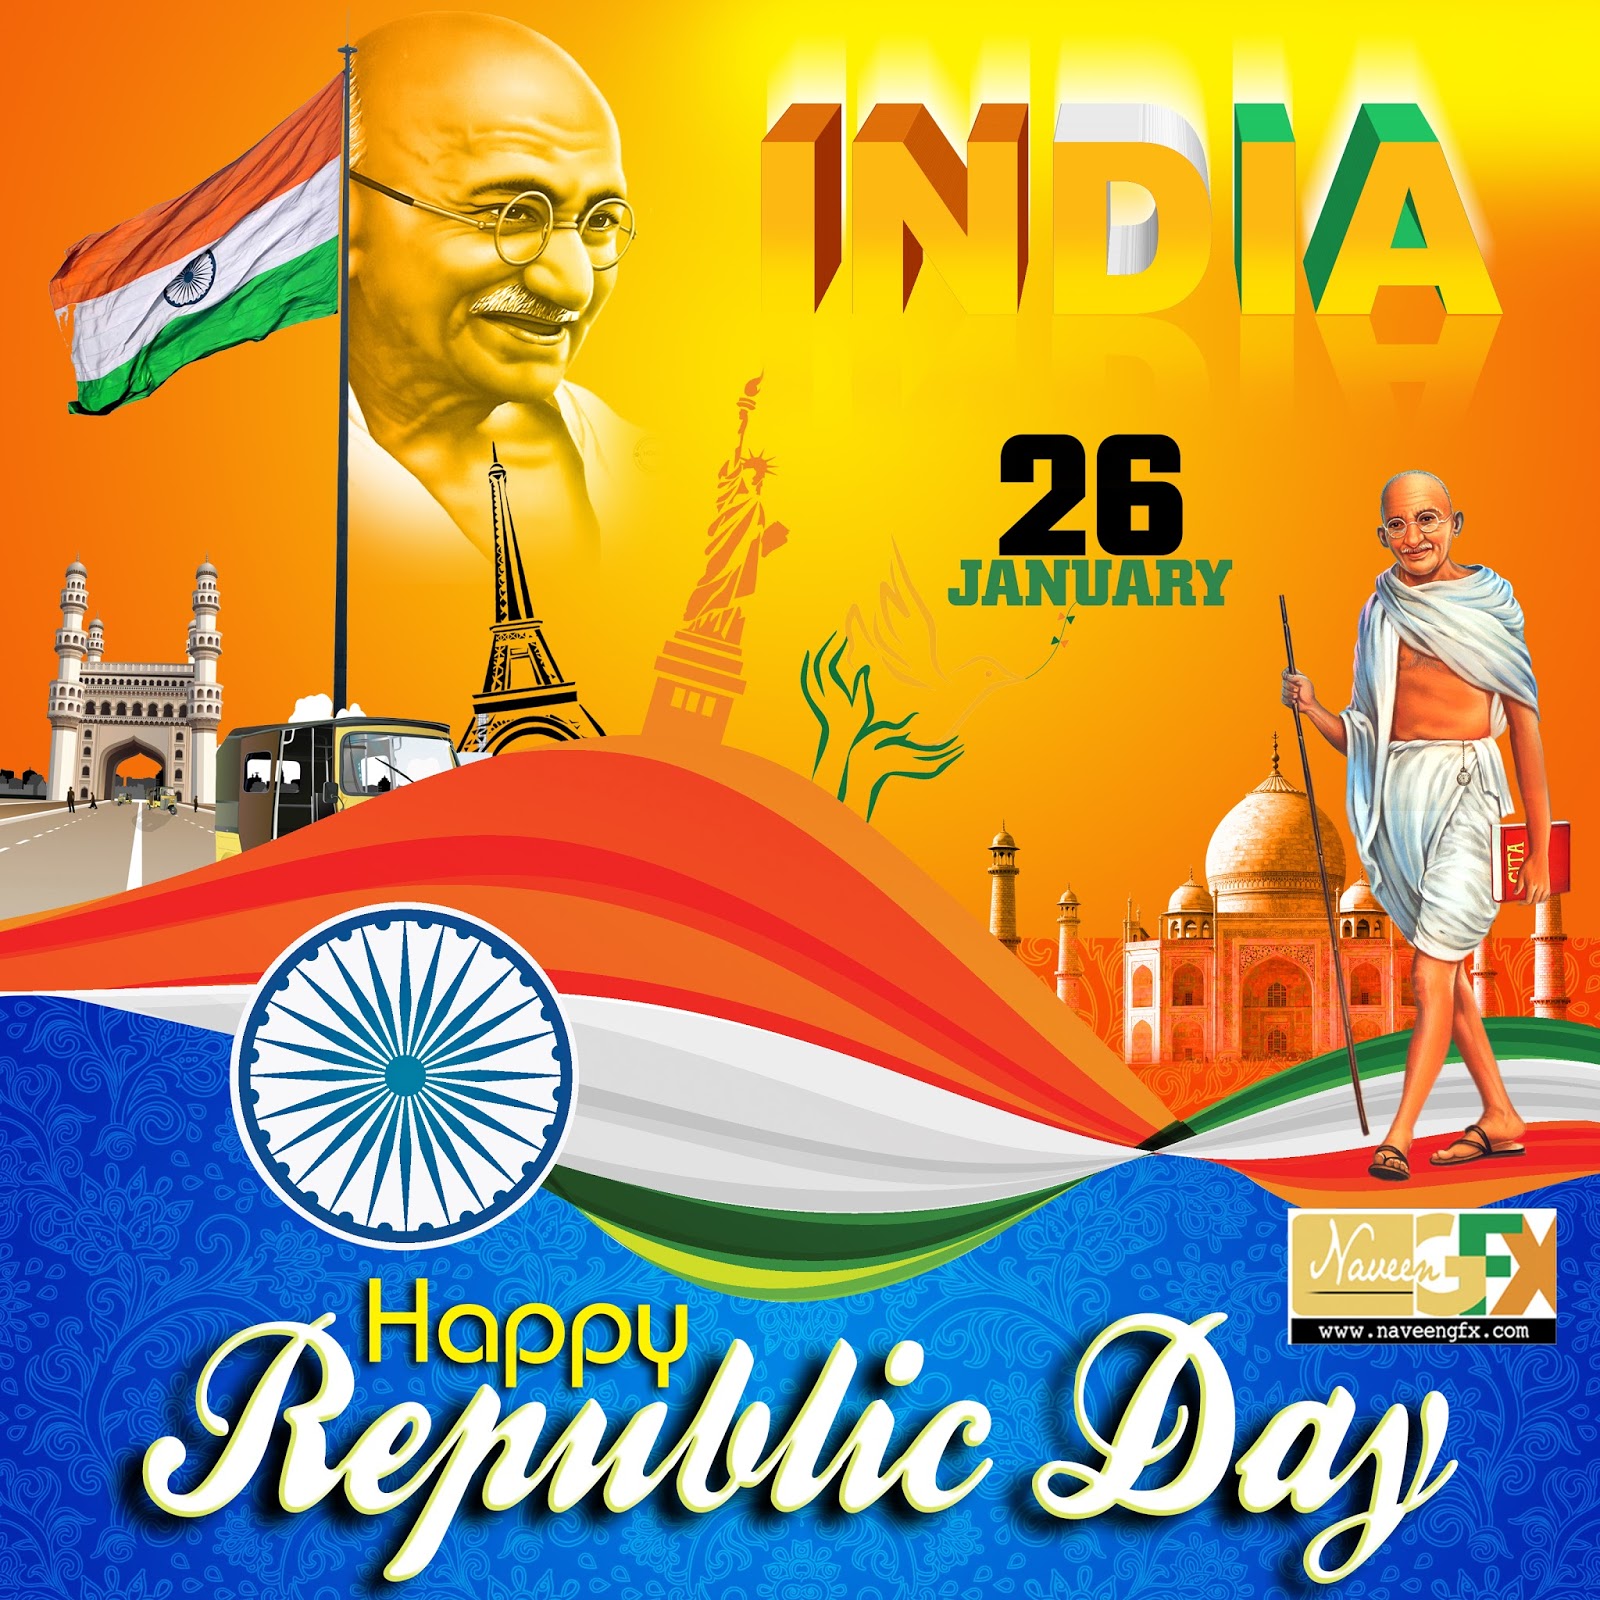 Republic Day Poster Design Psd Template Free Download